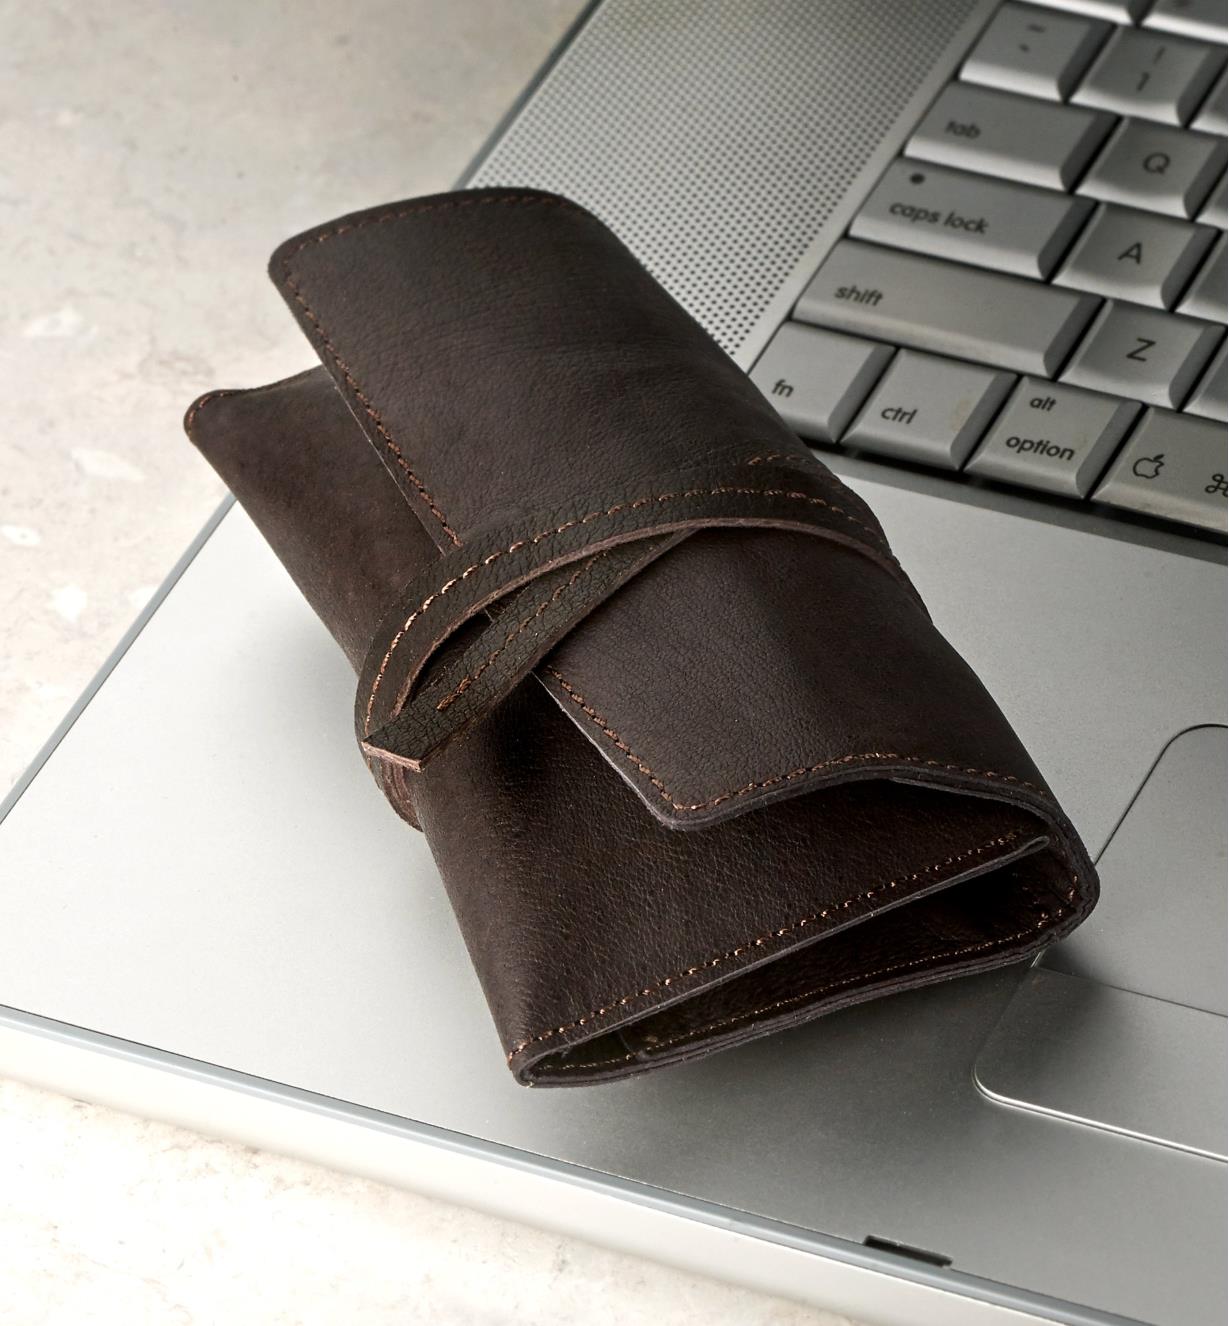 A leather cord wallet on a laptop computer, cinched closed with its leather tie